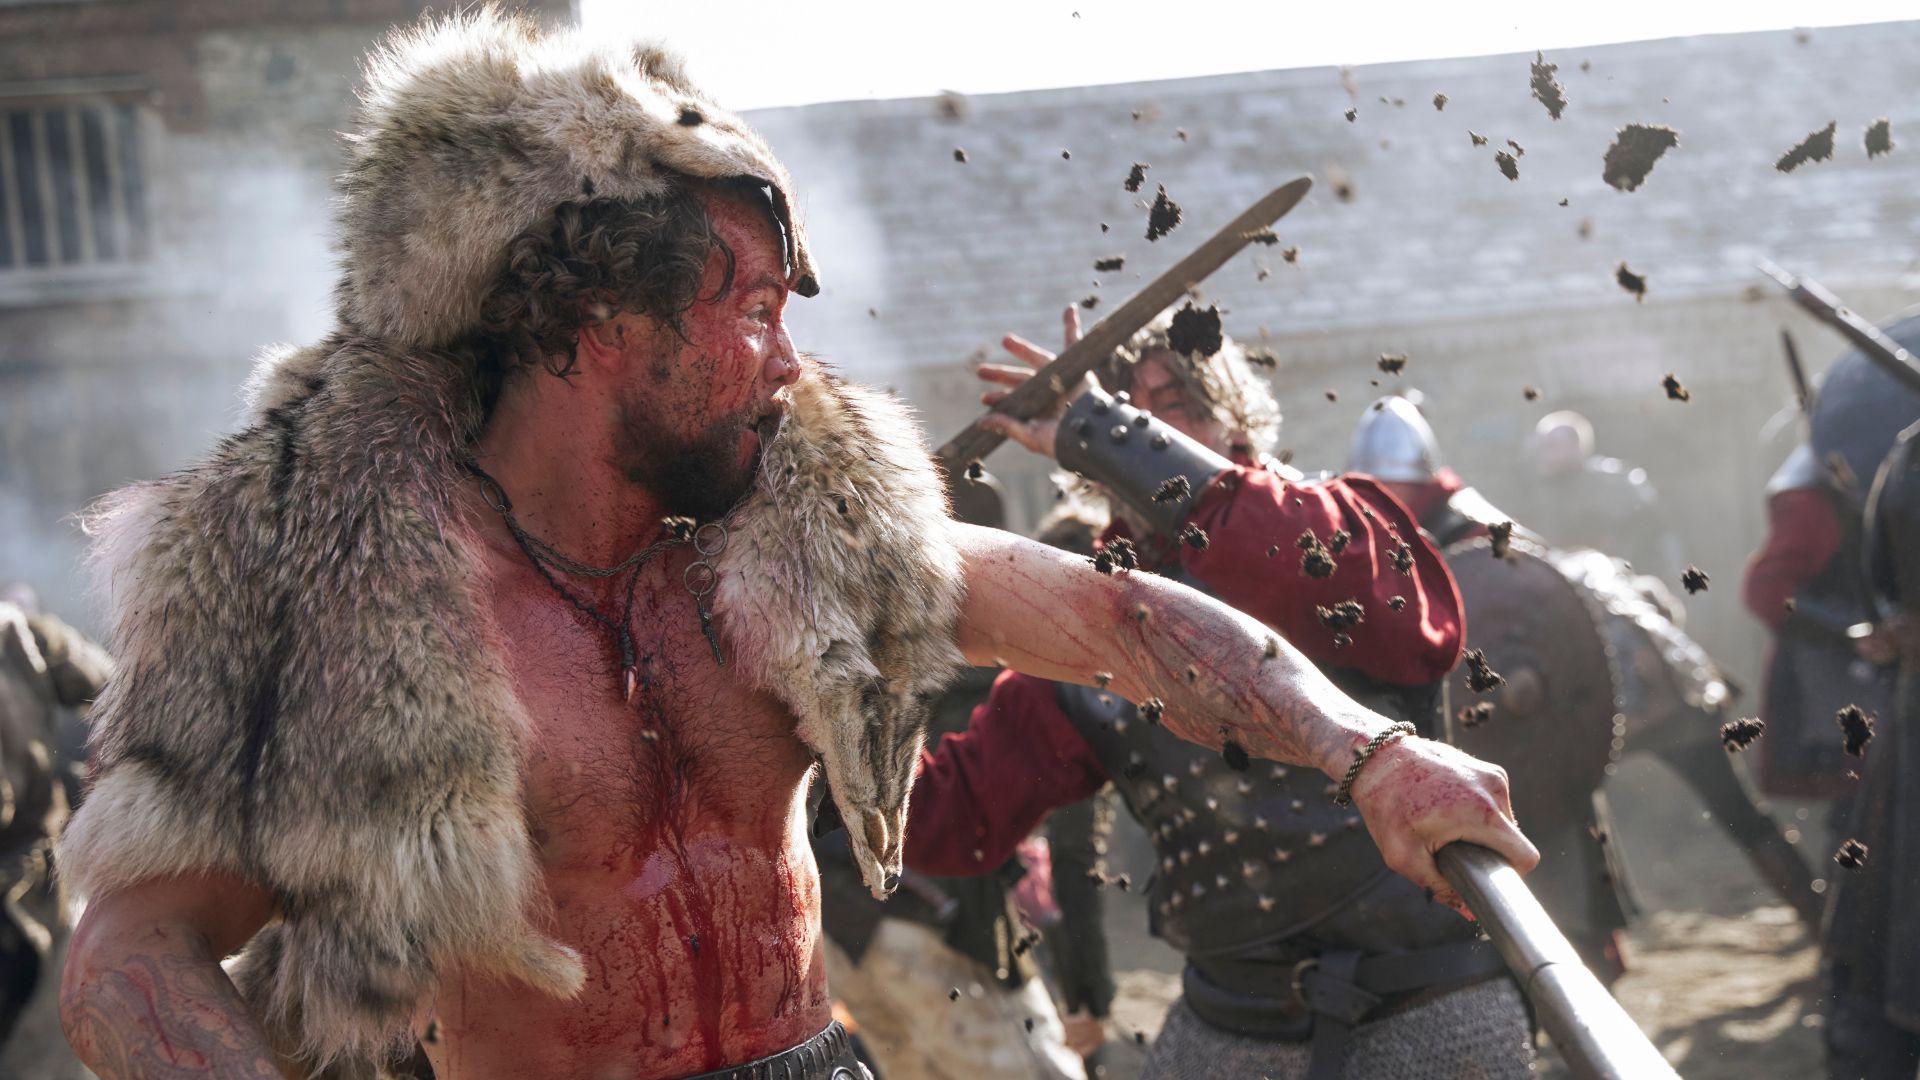 Vikings: Valhalla is one of the best Netflix shows to watch right now